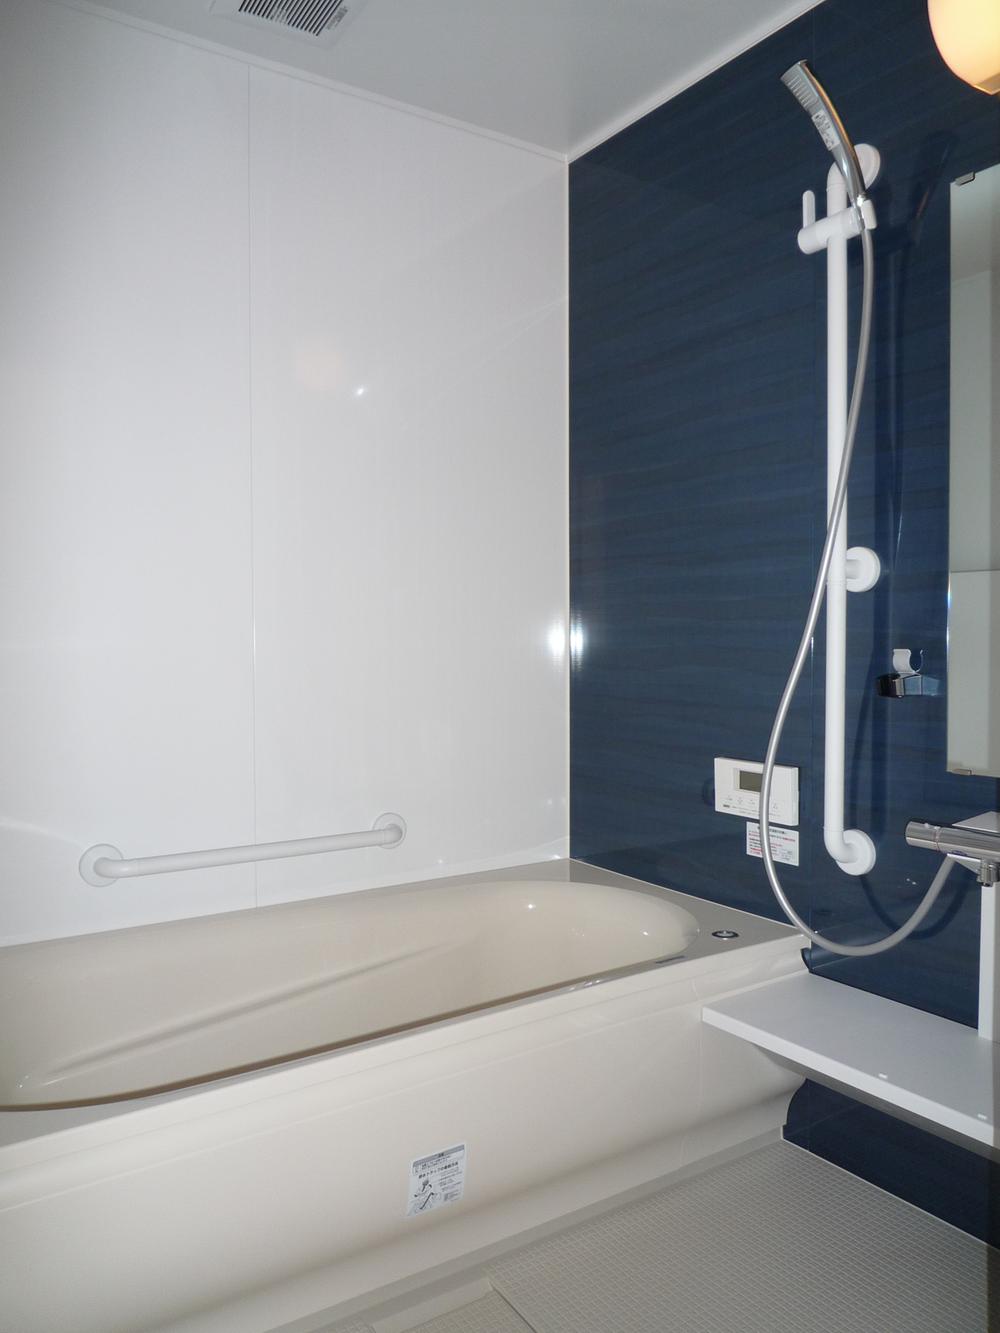 Same specifications photo (bathroom). Same specifications Photos / 1 pyeong unit bus